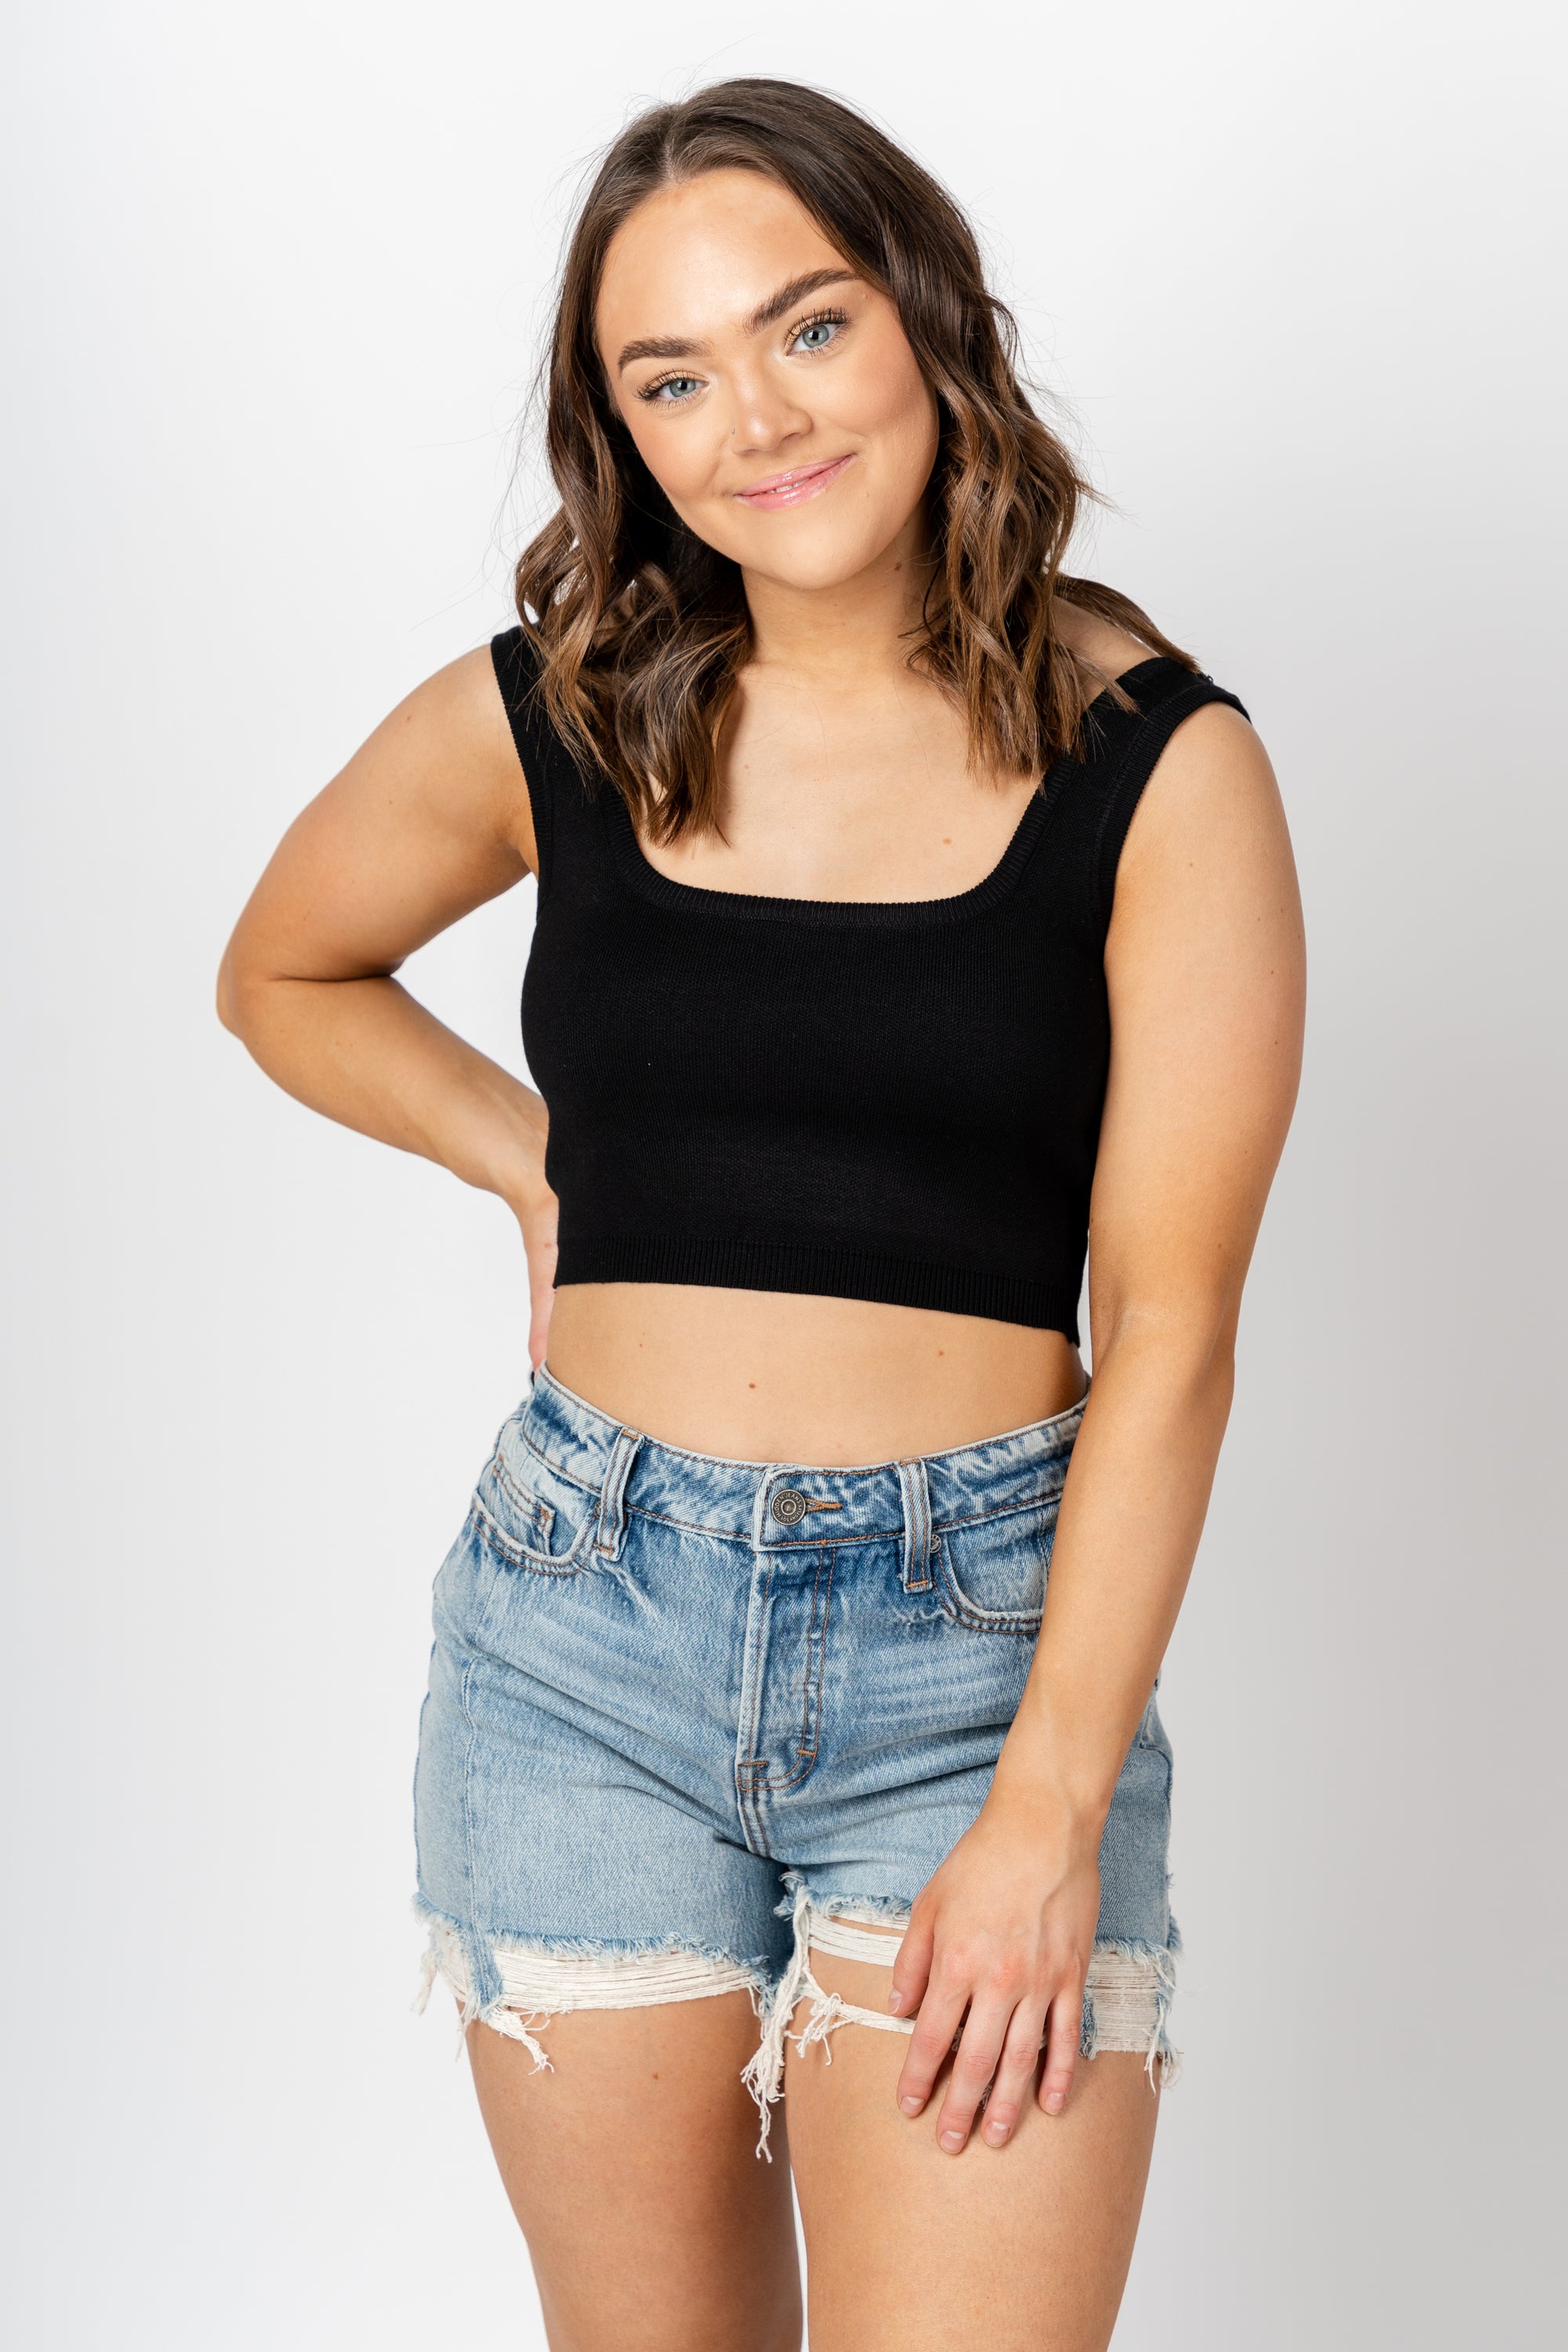 Sleeveless knit crop tank top black - Affordable Tank Top - Boutique Tank Tops at Lush Fashion Lounge Boutique in Oklahoma City